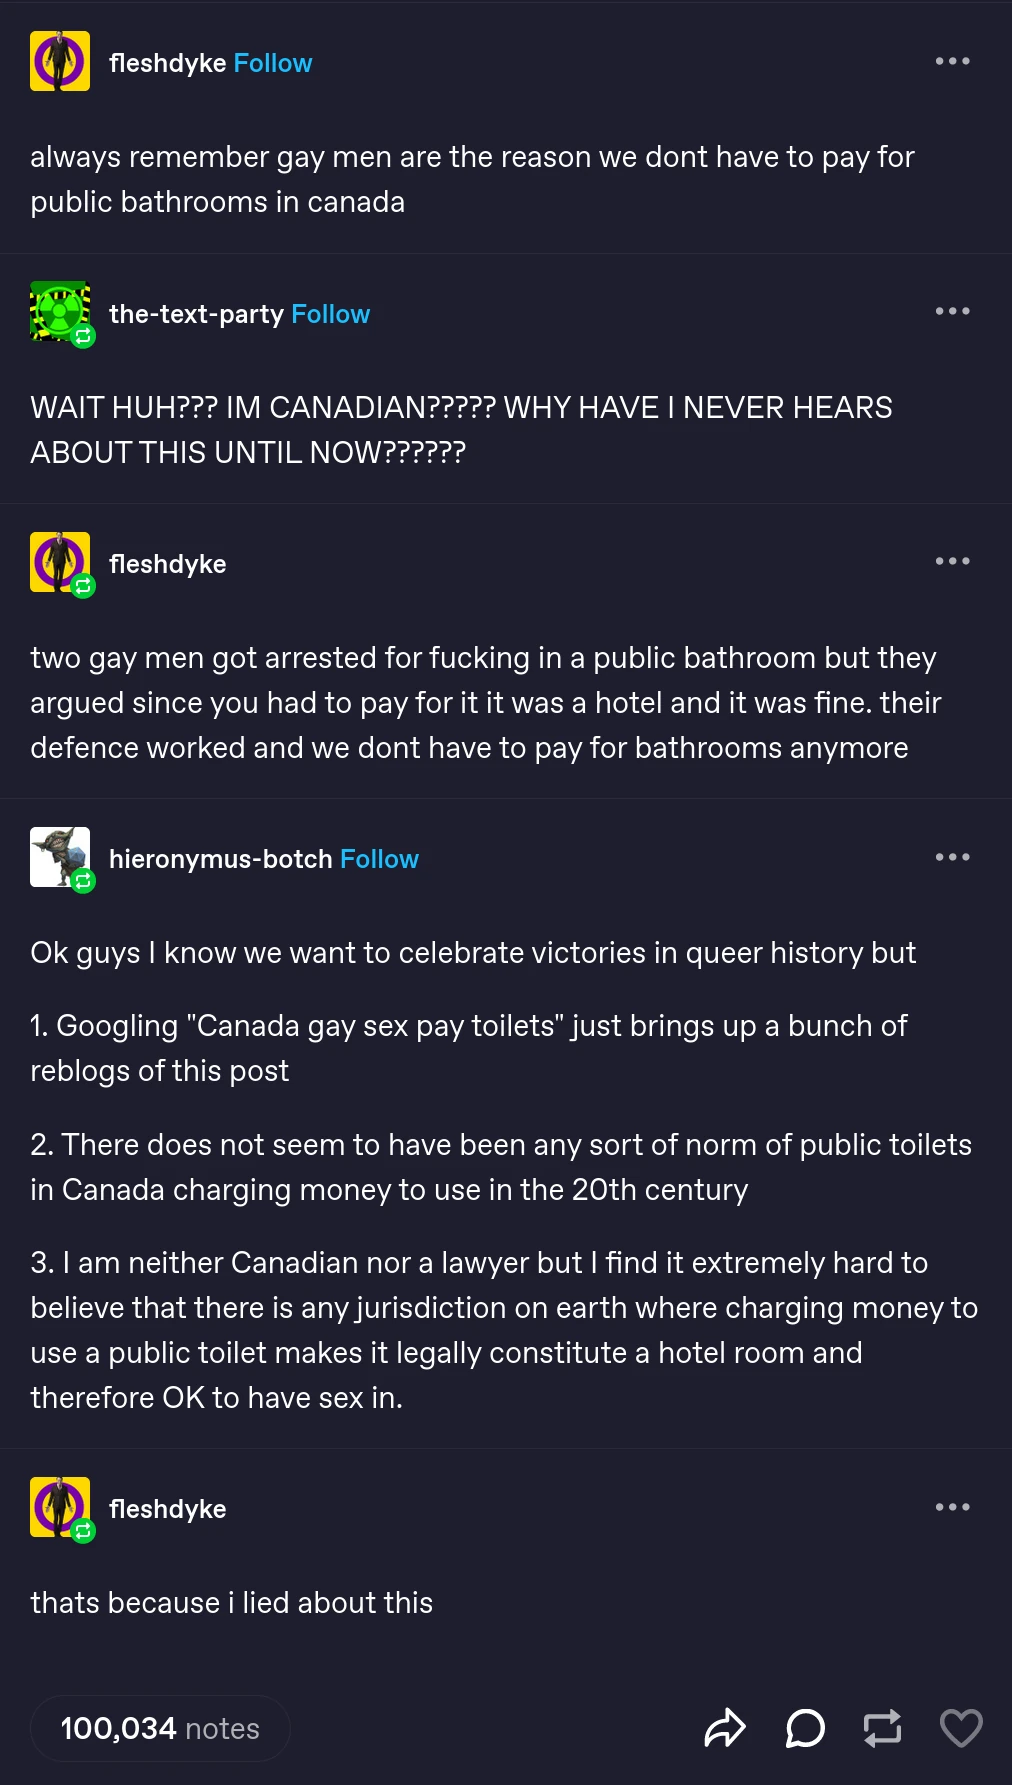 Tumblr post featuring multible users conversing. fleshdyke: "always remember gay men are the reason we dont have to pay for public bathrooms in canada" the-text-party: "WAIT HUH??? IM CANADIAN????? WHY HAVE I NEVER HEARS ABOUT THIS UNTIL NOW??????" fleshdyke: "two gay men got arrested for fucking in a public bathroom but they argued since you had to pay for it it was a hotel and it was fine. their defence worked and we dont have to pay for bathrooms anymore" hieronymus-botch: "Ok guys I know we want to celebrate victories in queer history but  1. Googling "Canada gay sex pay toilets" just brings up a bunch of reblogs of this post  2. There does not seem to have been any sort of norm of public toilets in Canada charging money to use in the 20th century  3. I am neither Canadian nor a lawyer but I find it extremely hard to believe that there is any jurisdiction on earth where charging money to use a public toilet makes it legally constitute a hotel room and therefore OK to have sex in." fleshdyke: "thats because i lied about this" 100,034 notes